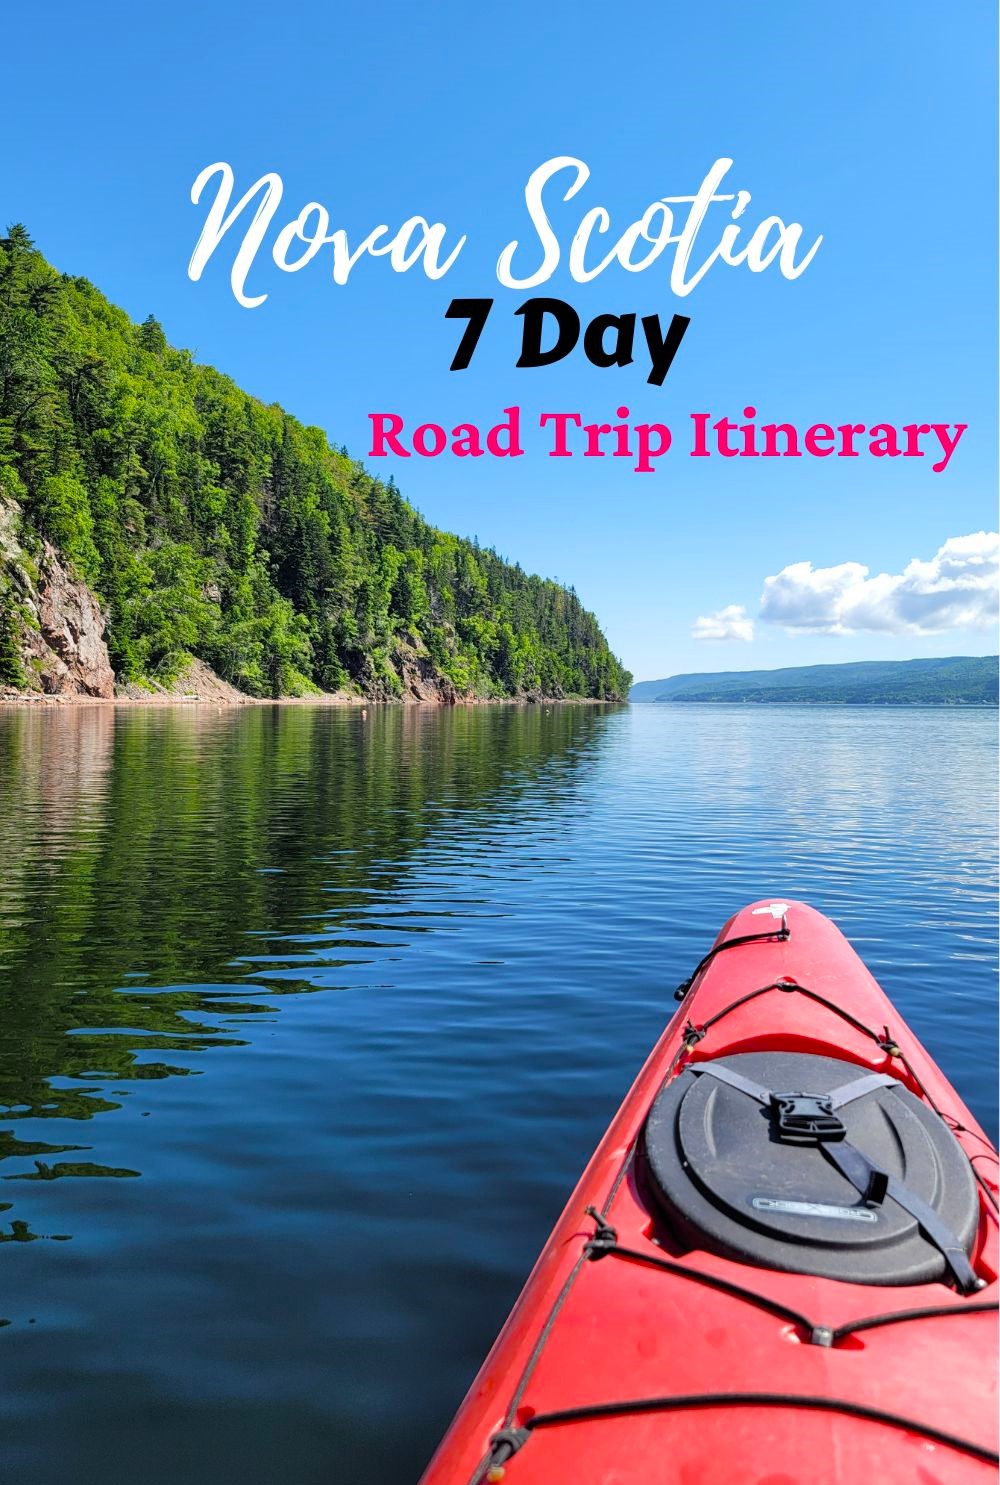 kayak in water next to green hill with Nova Scotia 7 day road trip itinerary written 